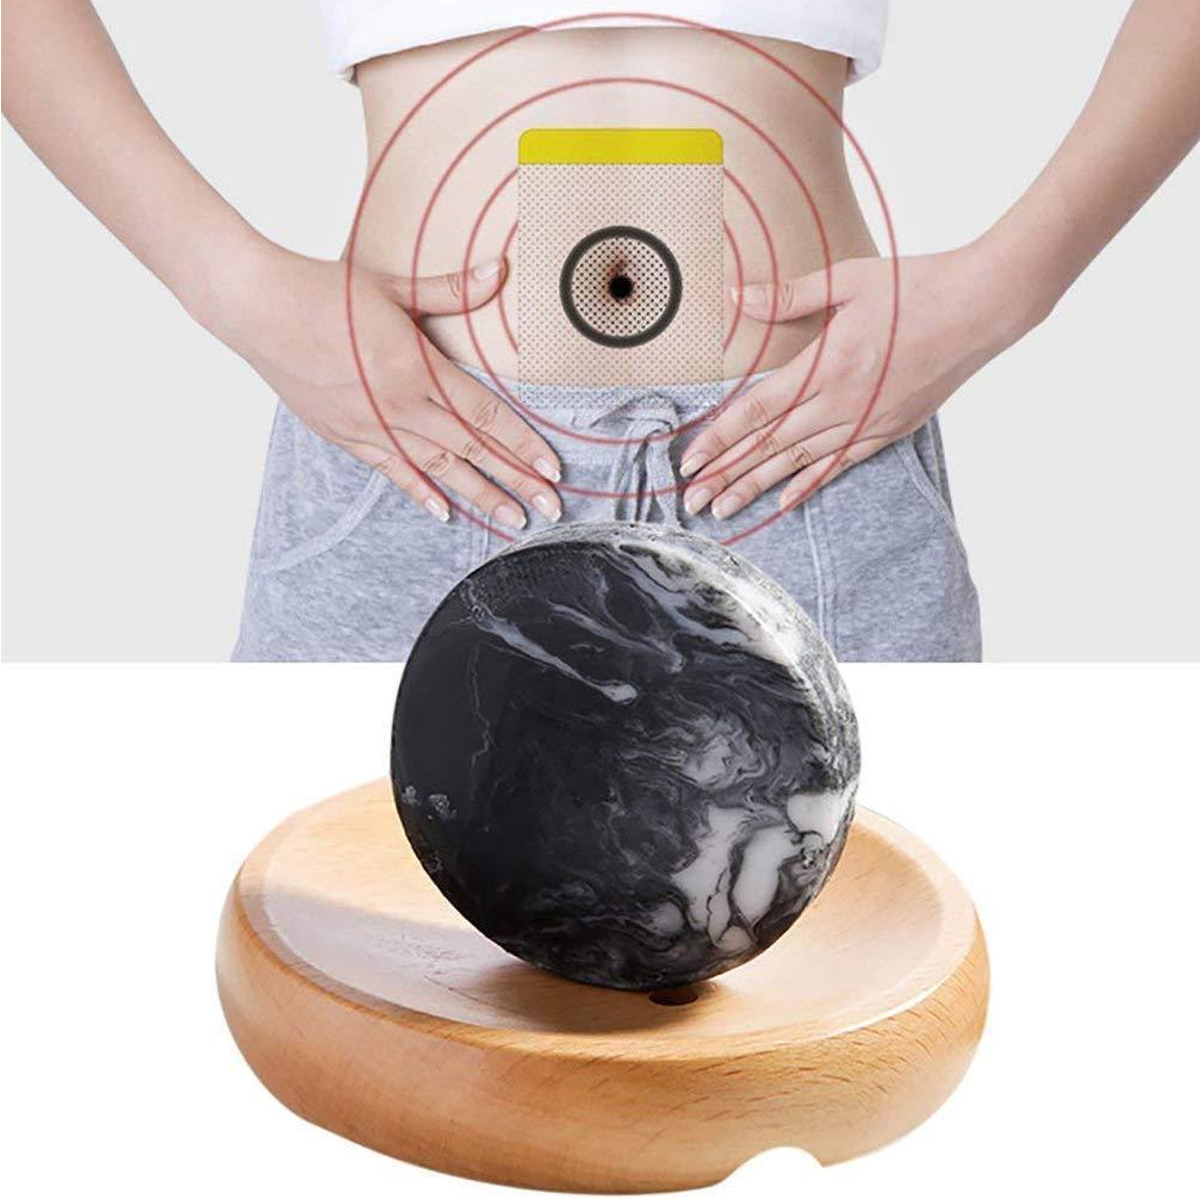 60g-Volcanic-Mud-Handmade-Soap-Deep-Cleaning-Oil-Slimming-Reshape-Body-Patch-1374853